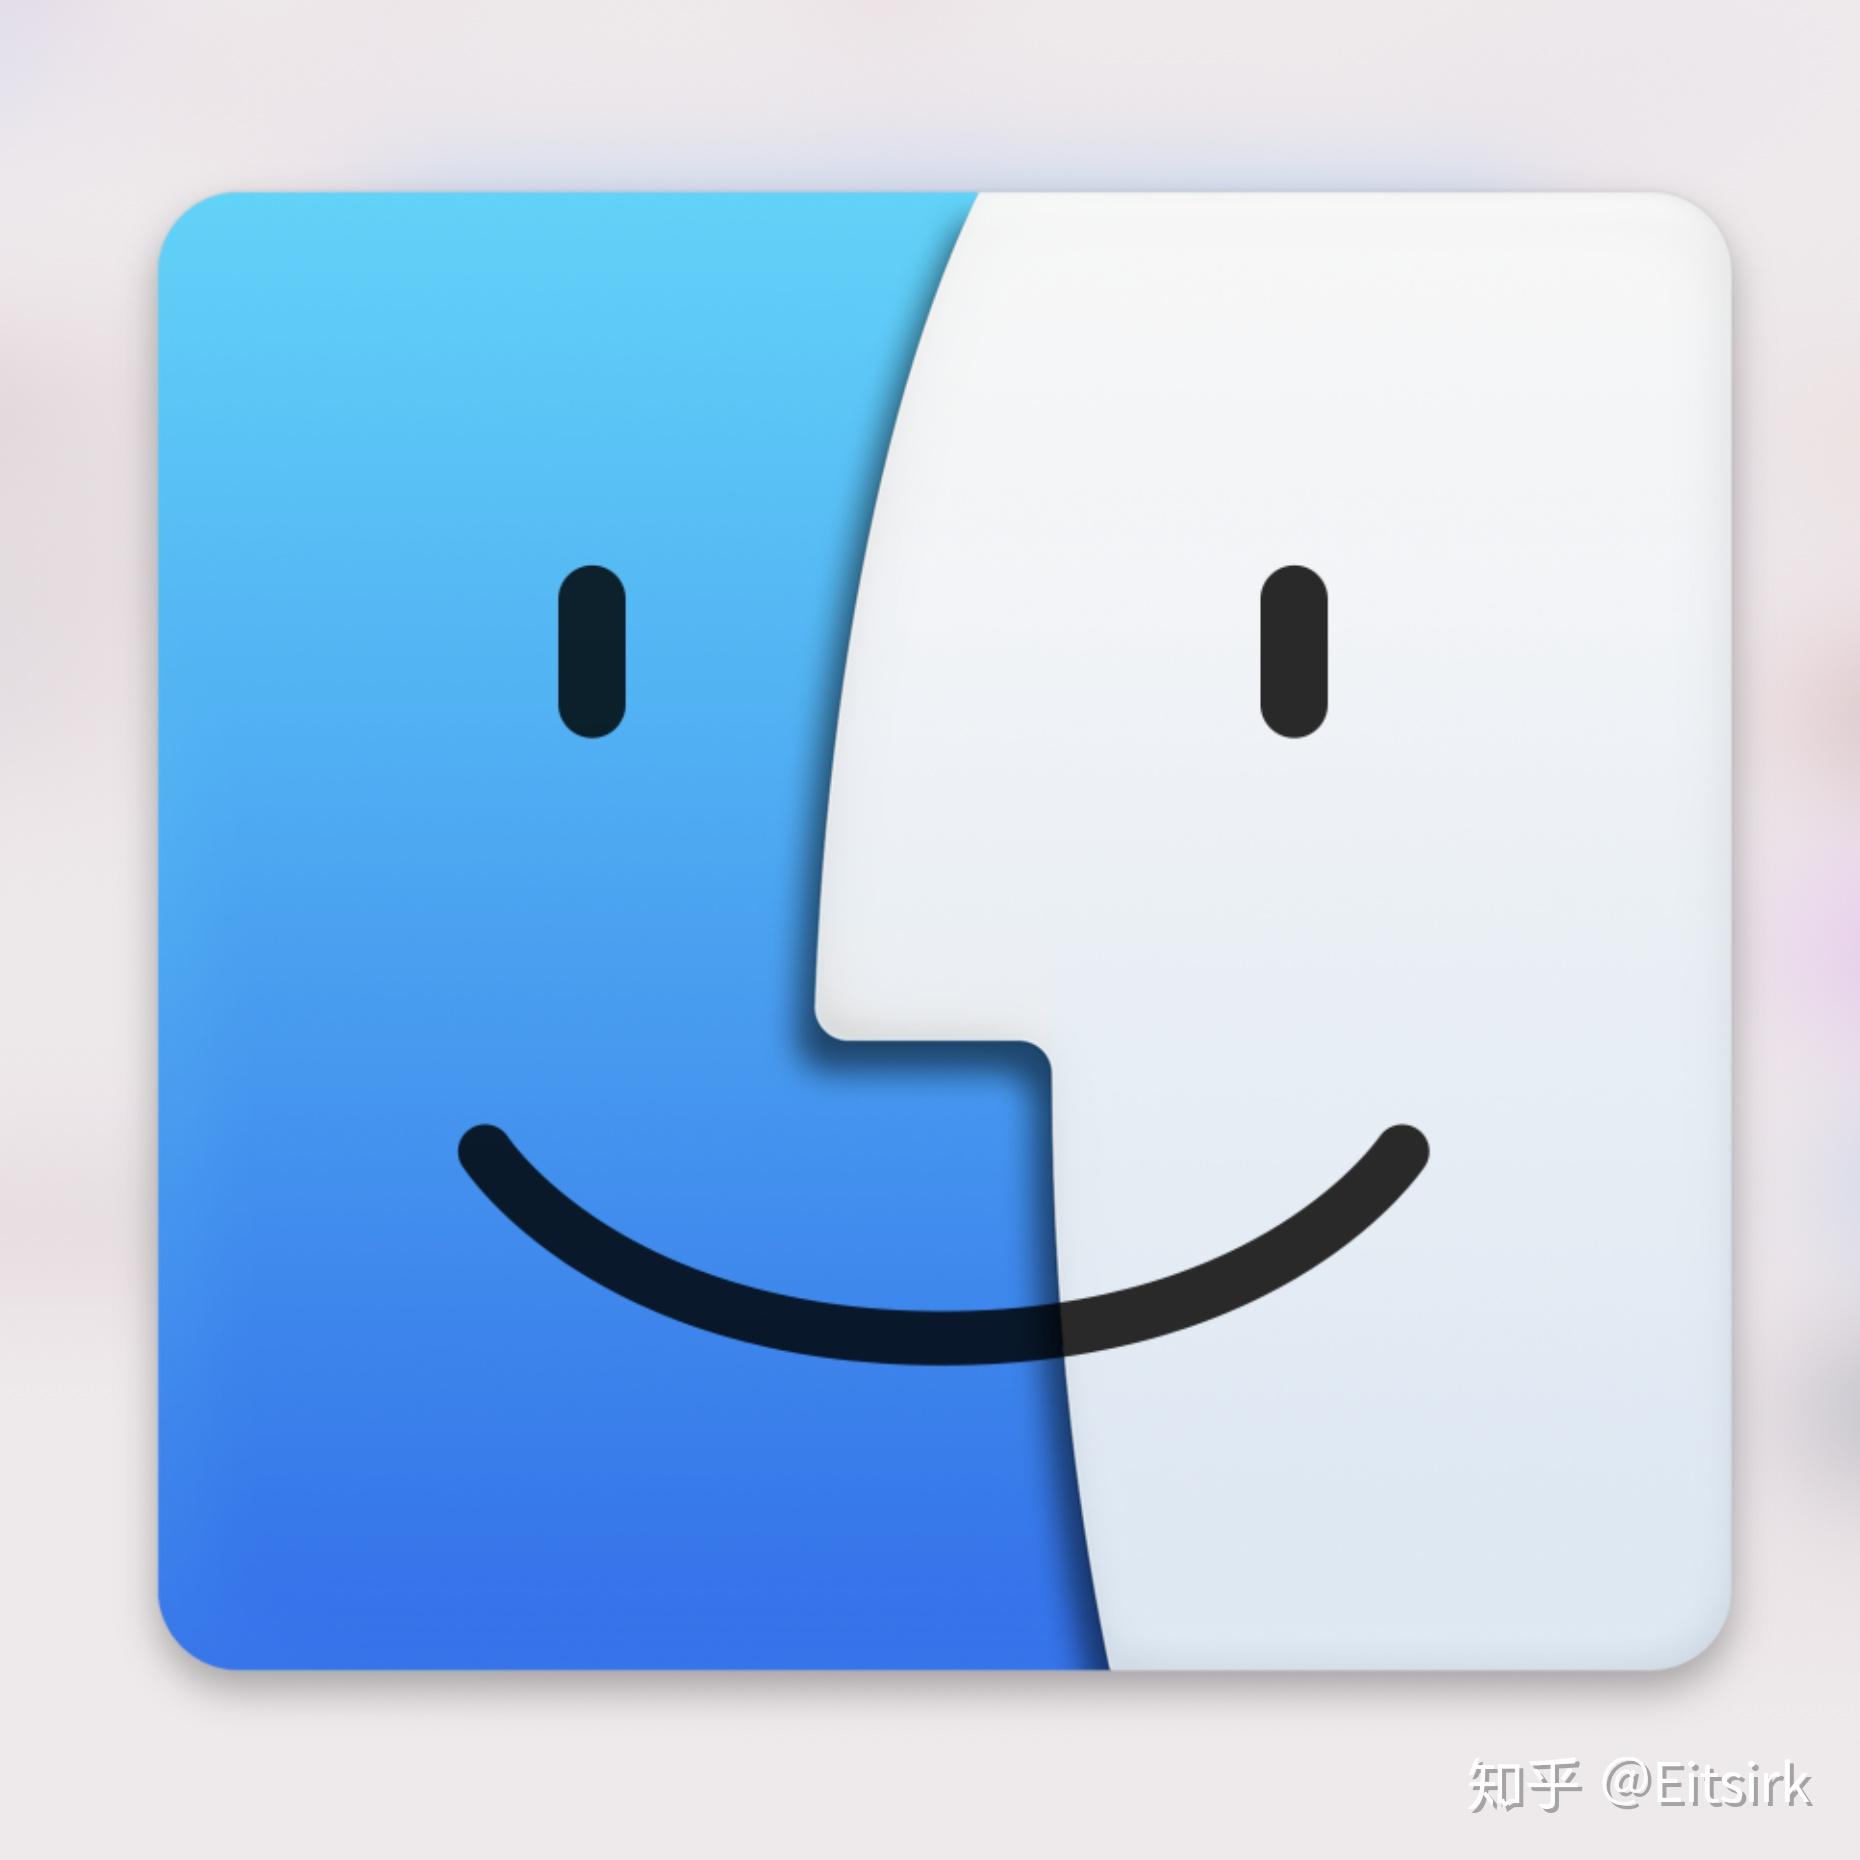 macos big sur replacement icons